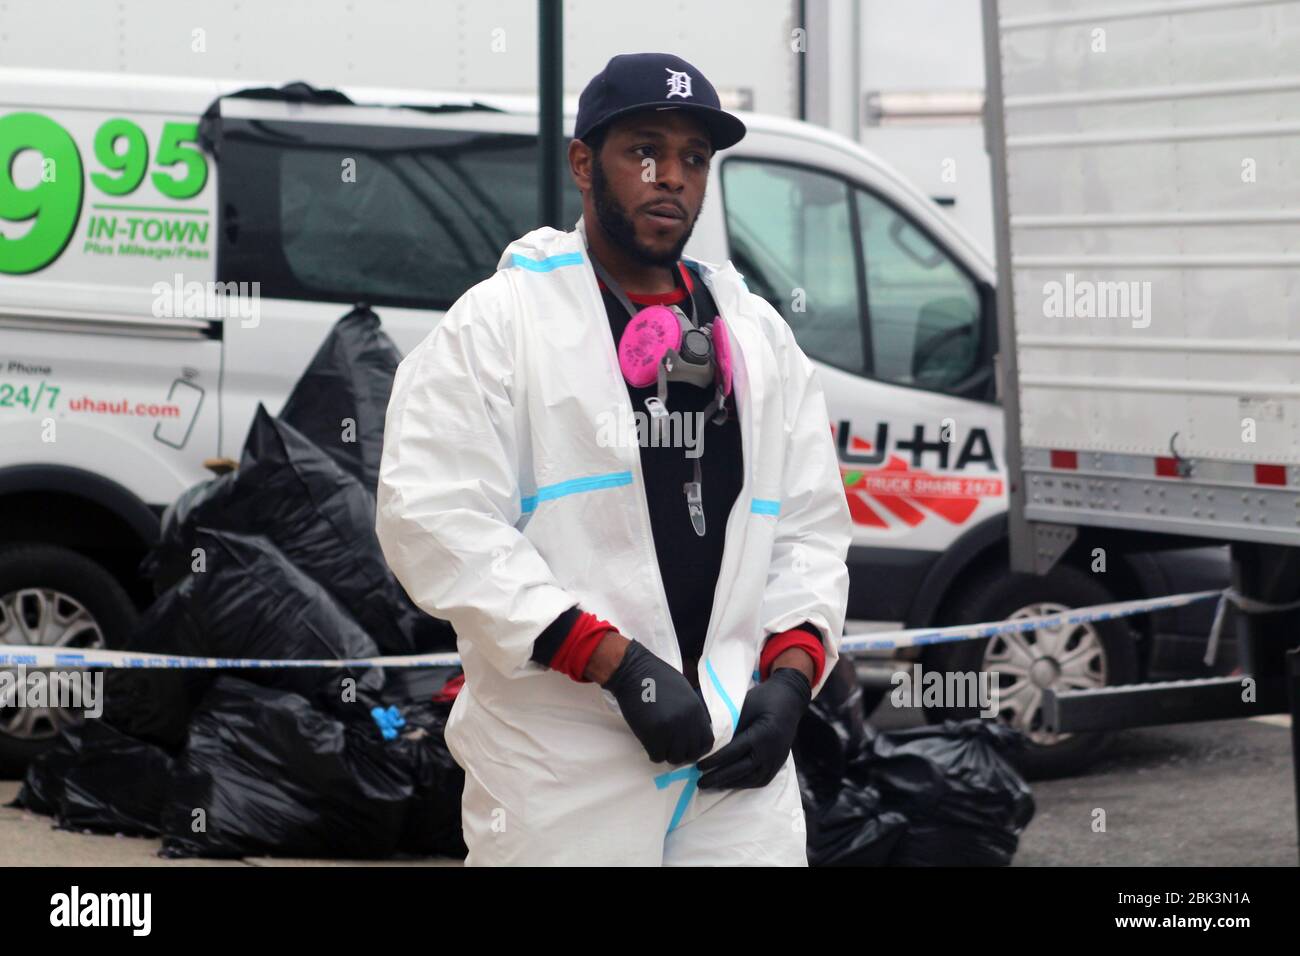 April 30, 2020, New York, New York, USA: This worker, dressed in a hazmat, walks surrounded by trucks. Behind him, big black garbage bags have been piled up in front of the Andrew T. Cleckley Funeral Home in Brooklyn where bodies non properly cared are removed. 60 corpses were stored in 4 non-refregerated rented trucks lining the street nearby stores. Neighbors reported a foul smell still persistent and fluids dripping from the trucks. Some remains were also found lying on the facilityÃ¢â‚¬â„¢s floor. The funeral home was overwhelmed by COVID-19 deaths, waiting for weeks for cremations. (Credi Stock Photo